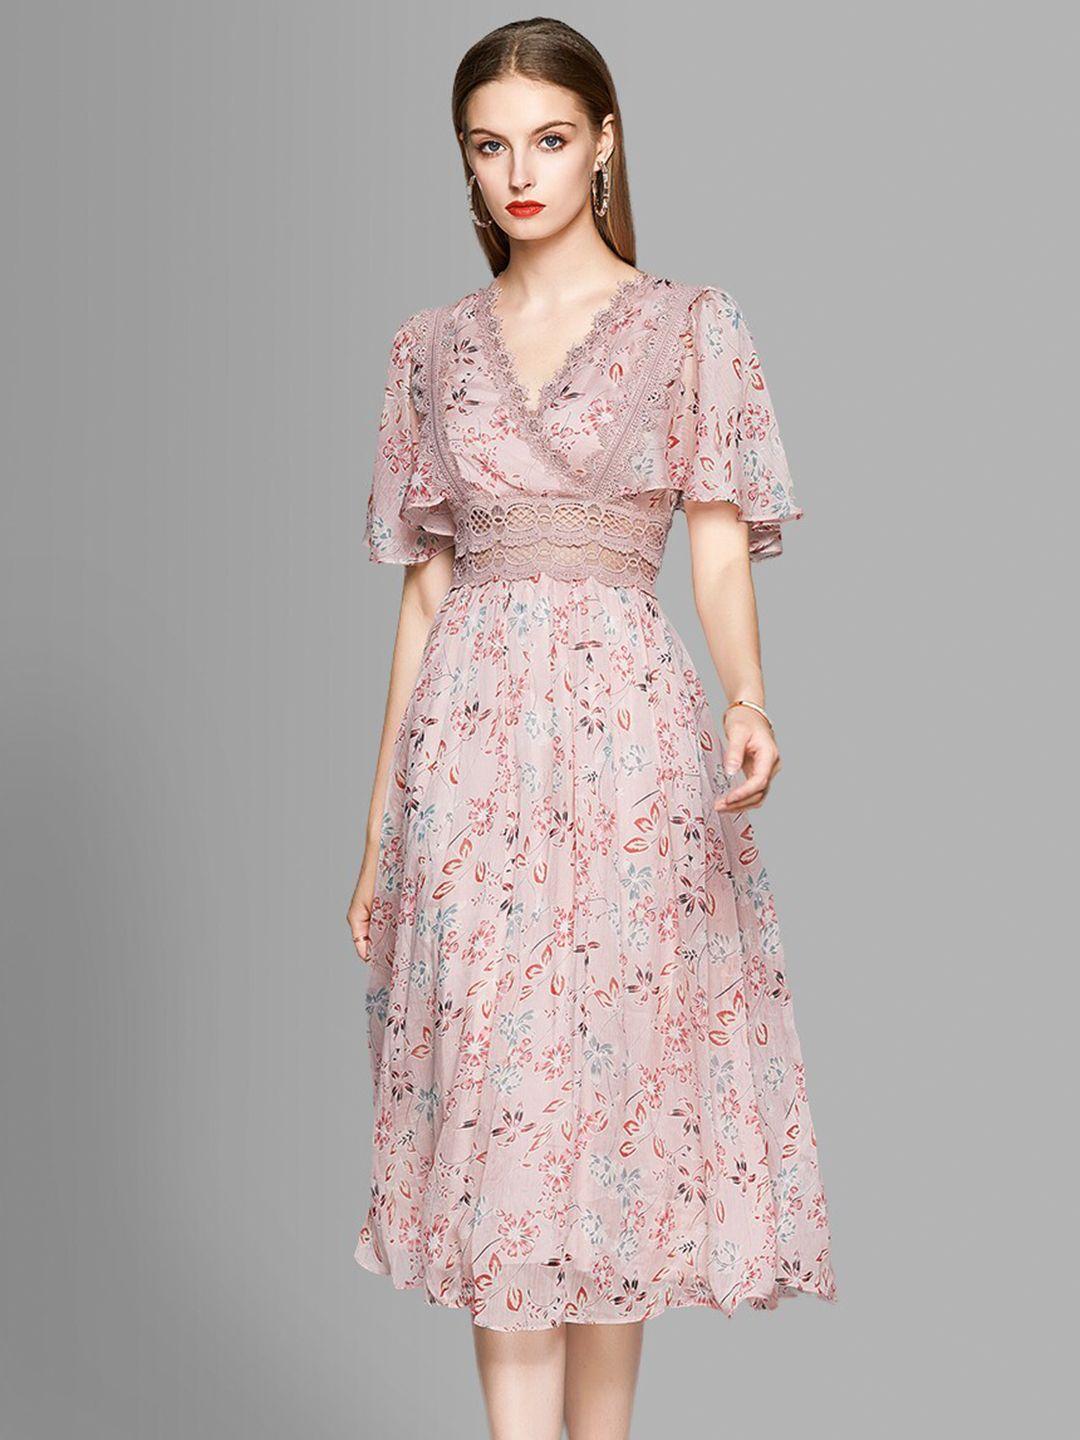 jc collection pink floral midi dress